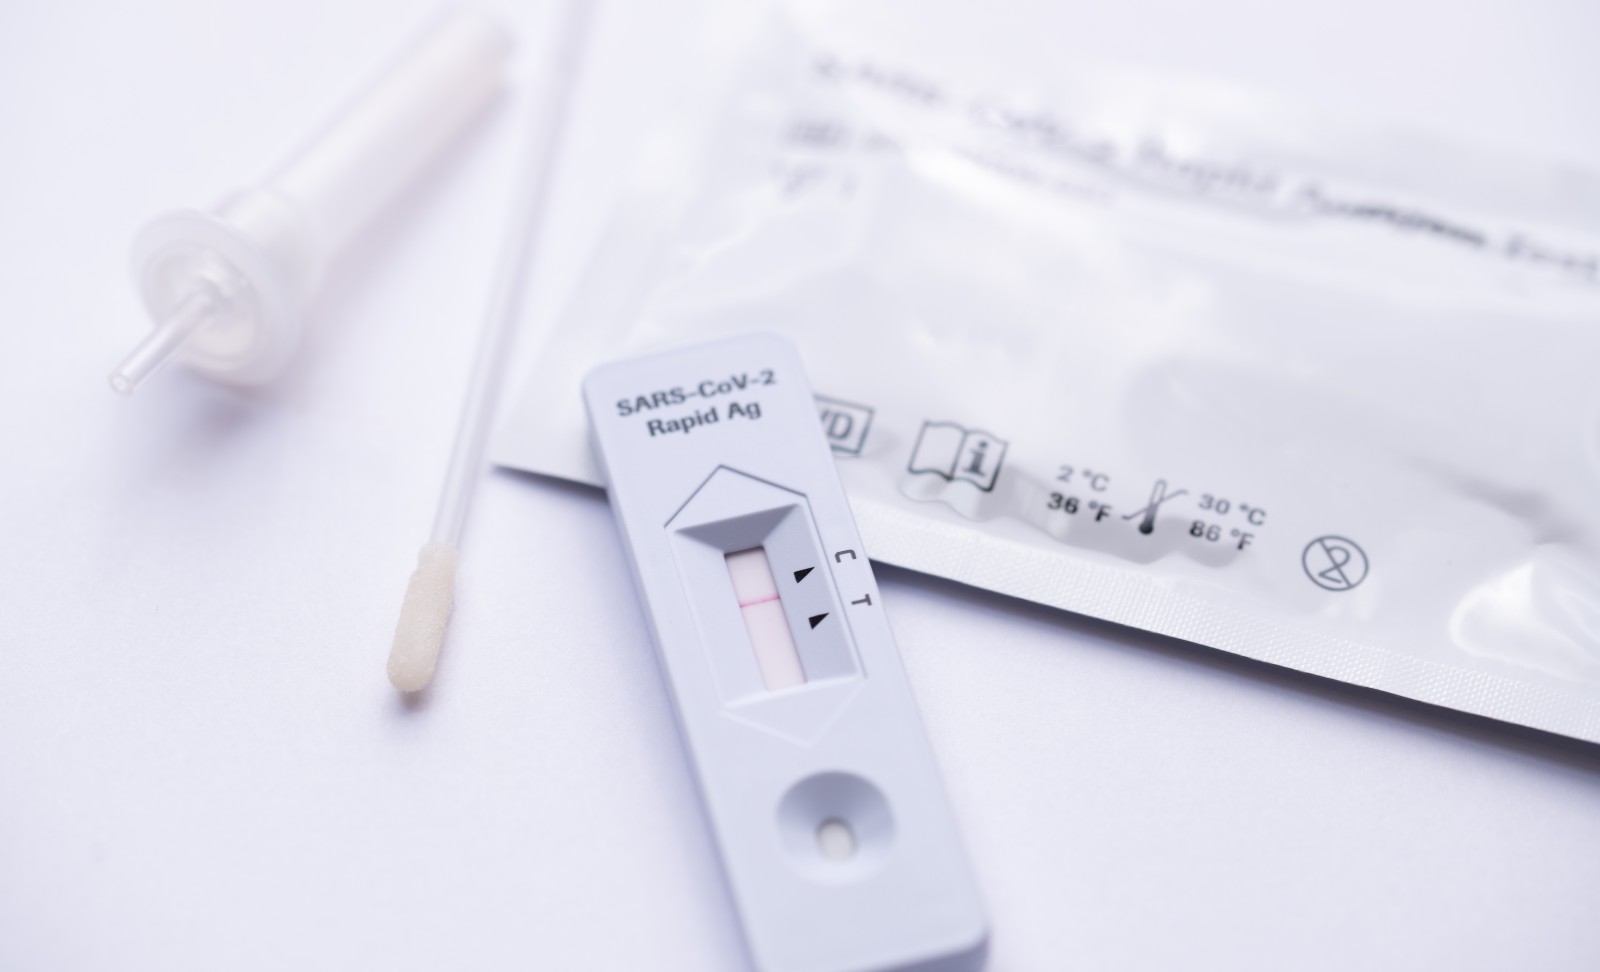 Covid testing: How to get free at-home rapid test kits - ZDNet